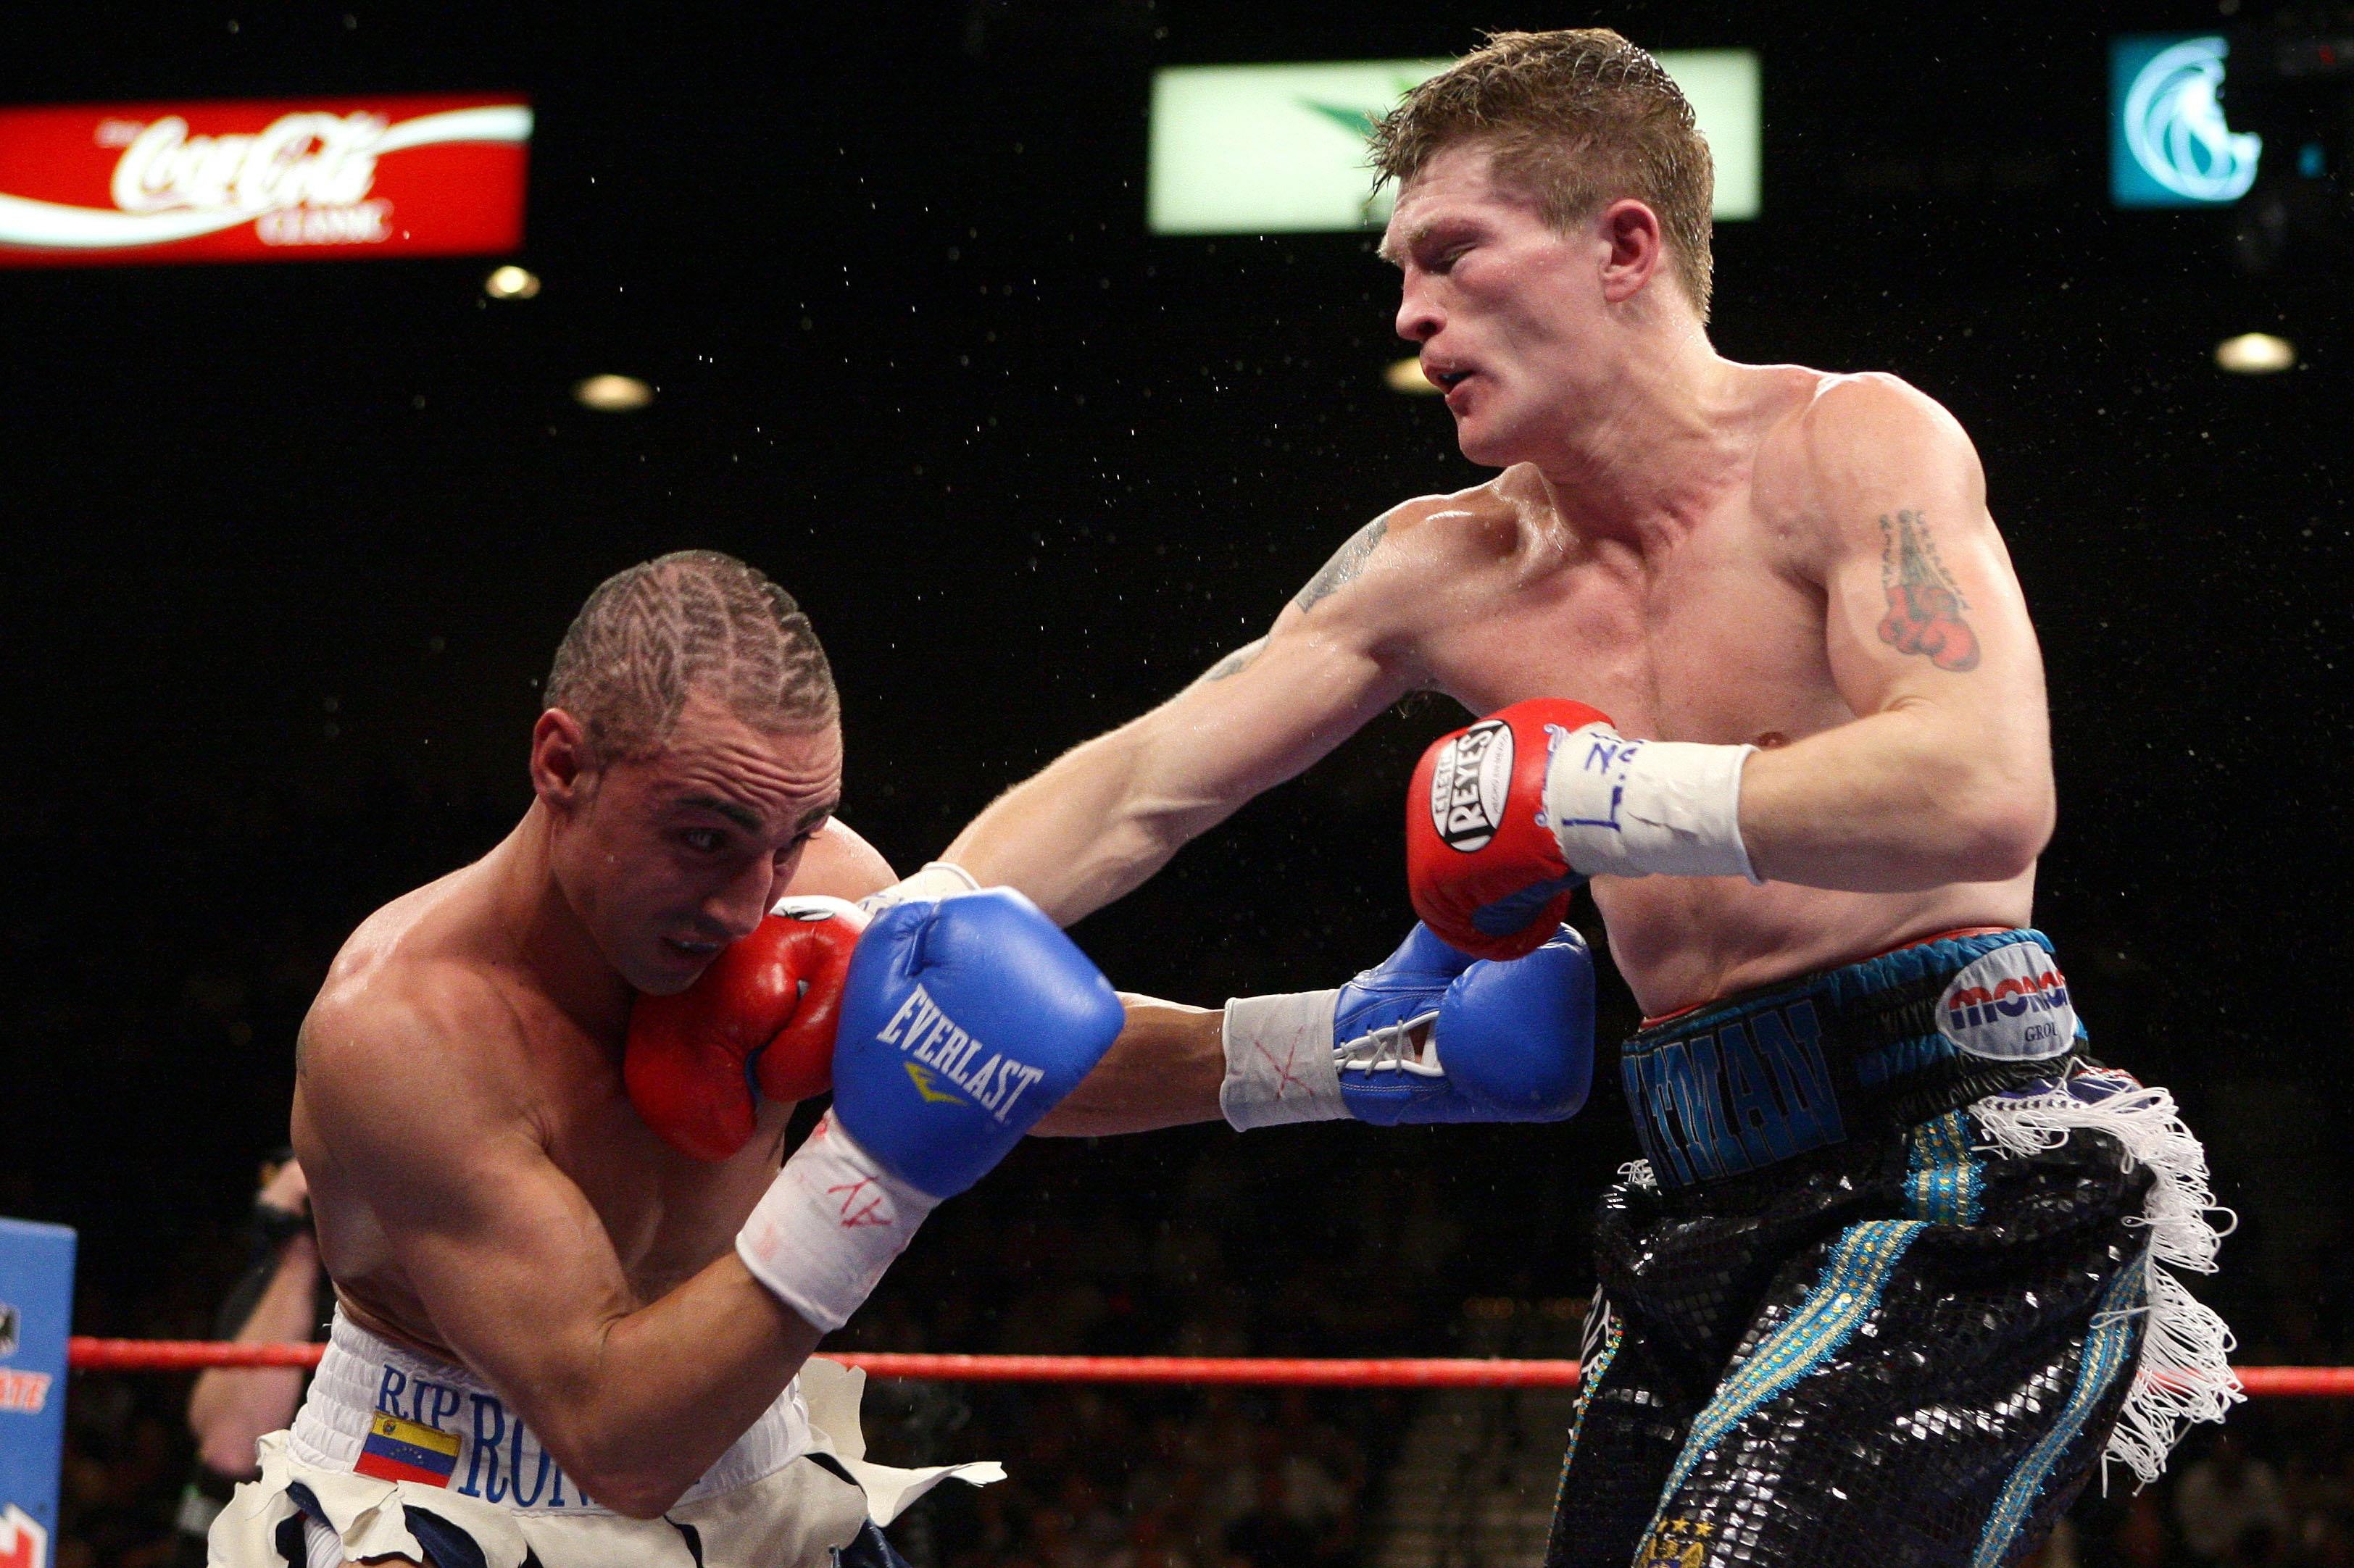 Ricky Hatton was one of Britain’s most popular boxers (Dave Thompson/PA)